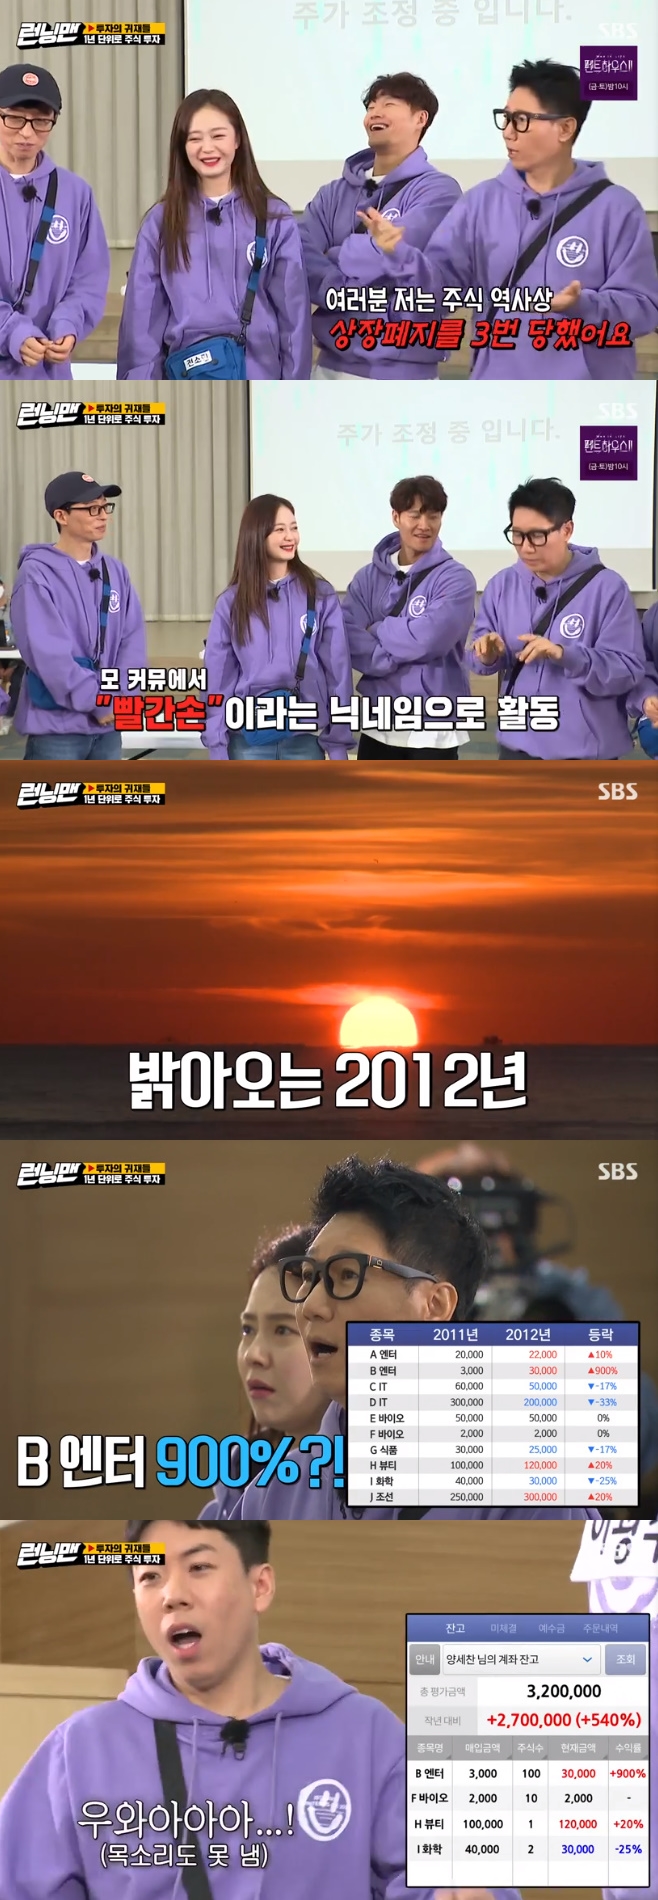 Running Man stock market has been shaken by fake news from Ji Suk-jinIn the SBS entertainment program Running Man broadcasted on the 21st, a mock stock investment game was held.On this day, the members conducted an investment game based on the stock index data of actual companies from 2010 to 2020.A total of 10 stocks were released under the initials, and the members invested 500,000 won in virtual money.Ji Suk-jin Jeon So-min bought information using points from the pregame.Ji Suk-jin all-in stock on news that HBeauty was favorable, and Jeon So-min also bought HBeauty.Ji Suk-jin then sprayed fake information around the Enter is good, and Yang Se-chan, who heard it, made All In to B Enter, and Jeon So-min and Yoo Jae-Suk also made small purchases.Ji Suk-jin has spread the stock information he has experienced since he sprayed fake information. He has been delisted but has been through three times.Community nickname was red hand, he said, making the surroundings furious.After a virtual year, in 2011, B-enter had a return of 900%.Yang Se-chan became a thunderstorm rich with 540% proceeds, and Jurin Jeon So-min also posted a 328% return.Lee Kwang-soo, who had all-in after hearing the chemical information of Yoo Jae-Suk, laughed at the loss.